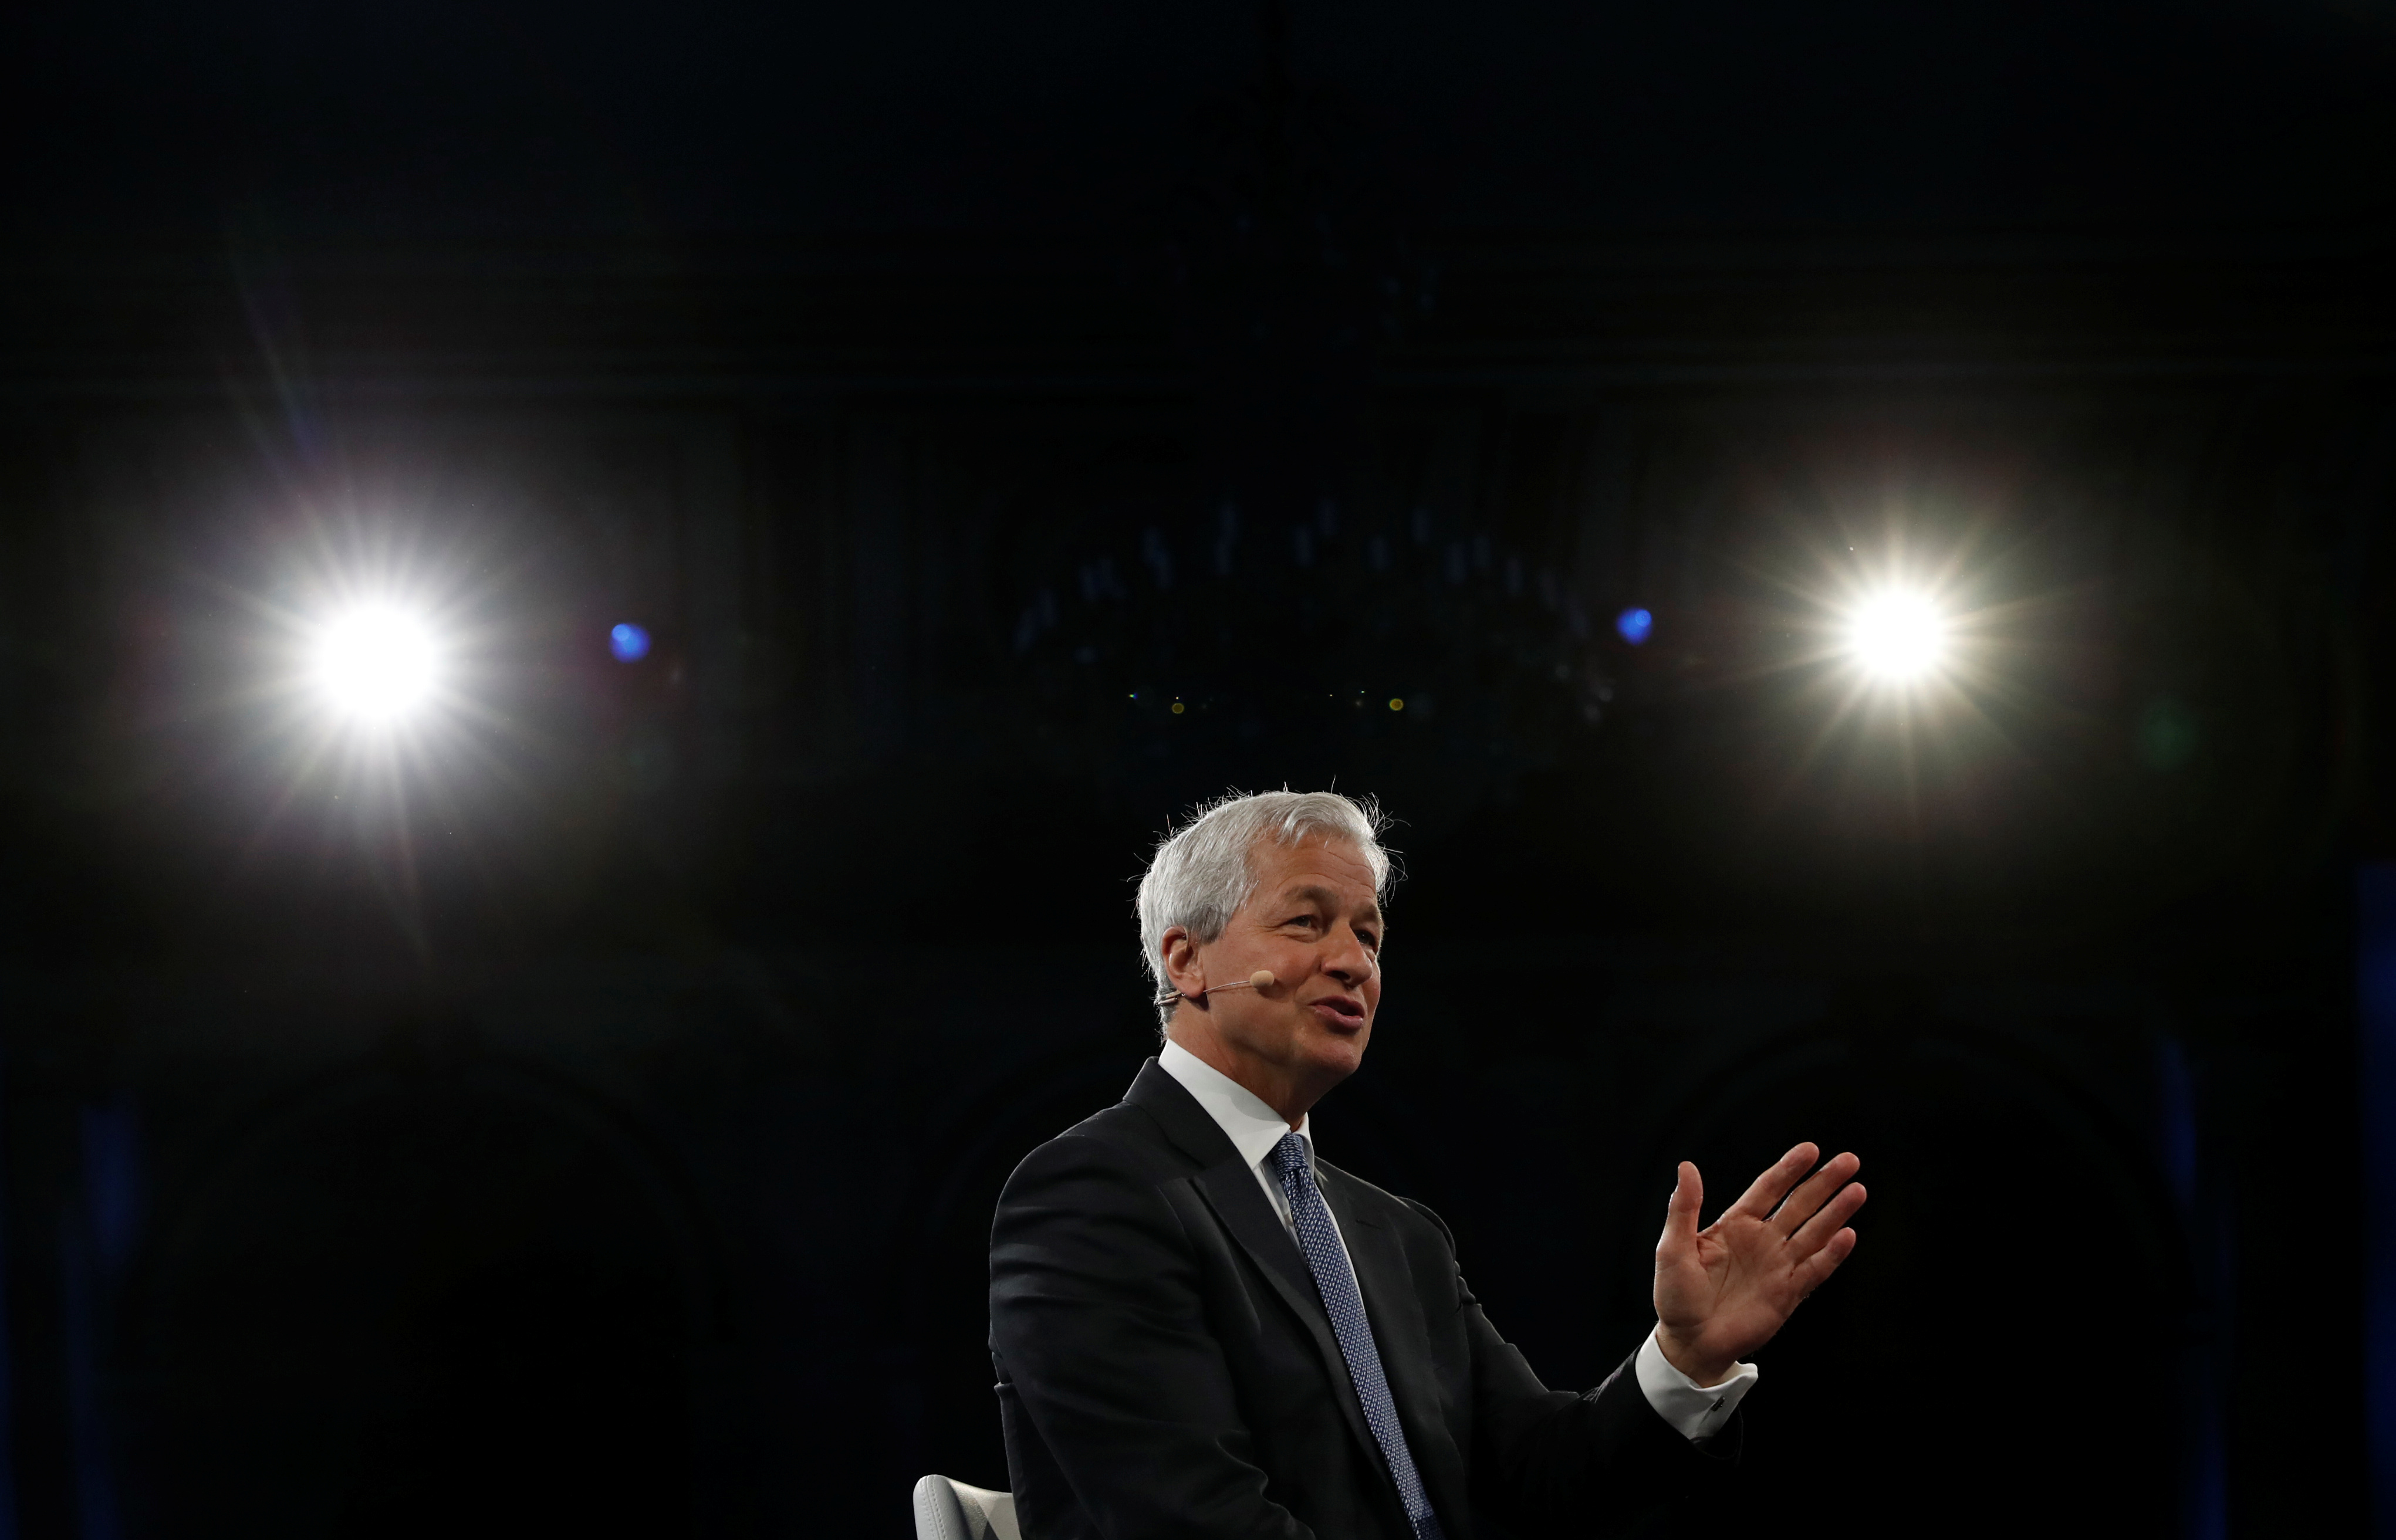 Jamie Dimon, chairman & CEO of JP Morgan Chase & Co., speaks during the Bloomberg Global Business Forum in New York City, New York, U.S., September 25, 2019.